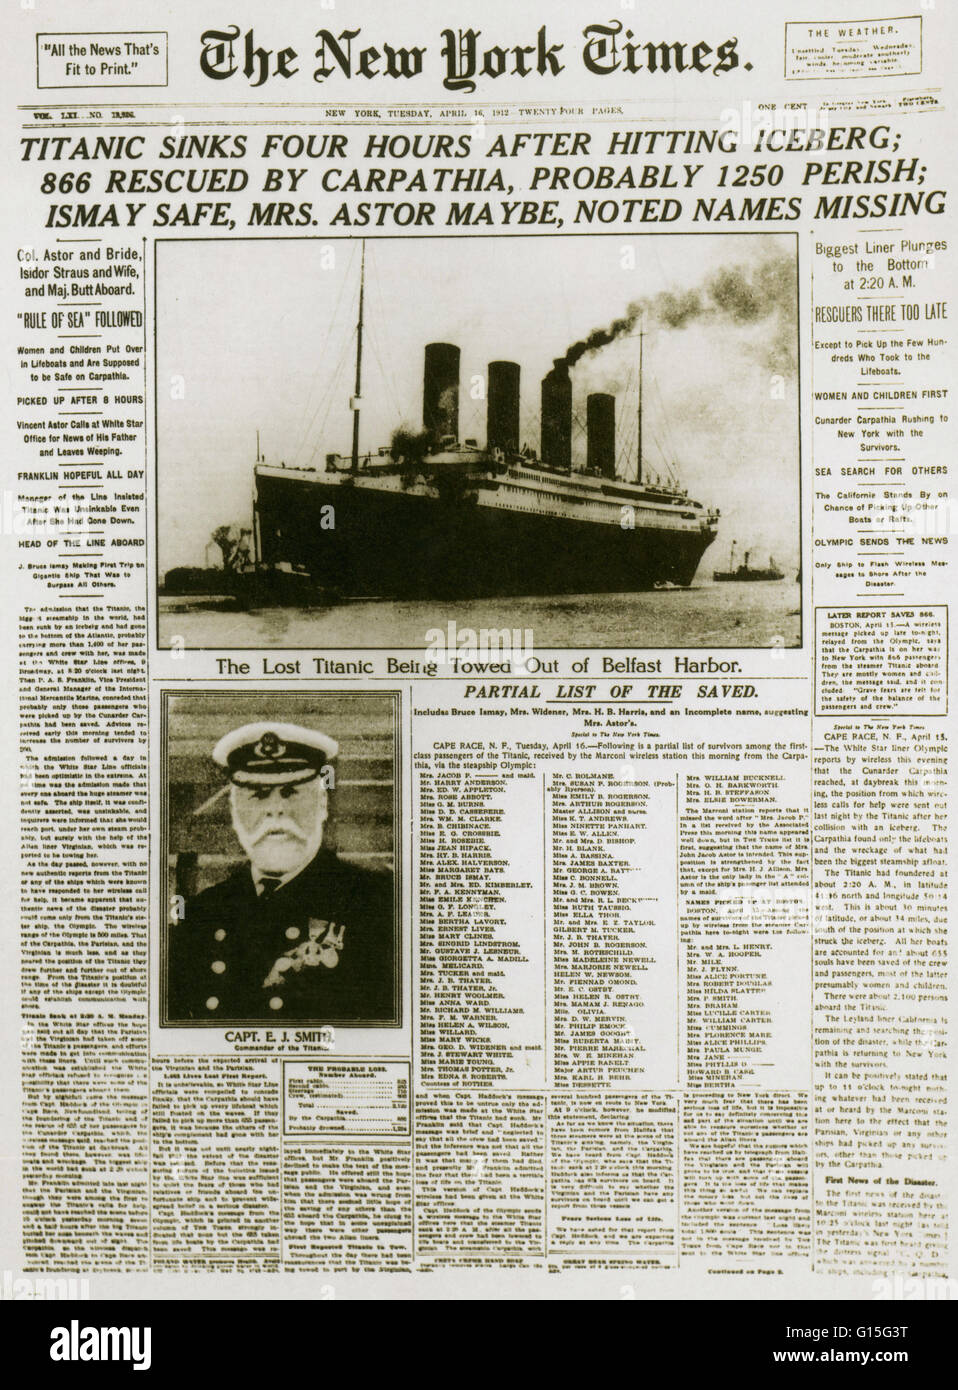 New York Times article from April 16th, 1912 about the Titanic Sinking. The Titanic steamship was the largest ship ever built at the time. In 1912, the ship sailed from Southampton, England to New York City. On April 14th, 1912 the ship struck an iceberg Stock Photo